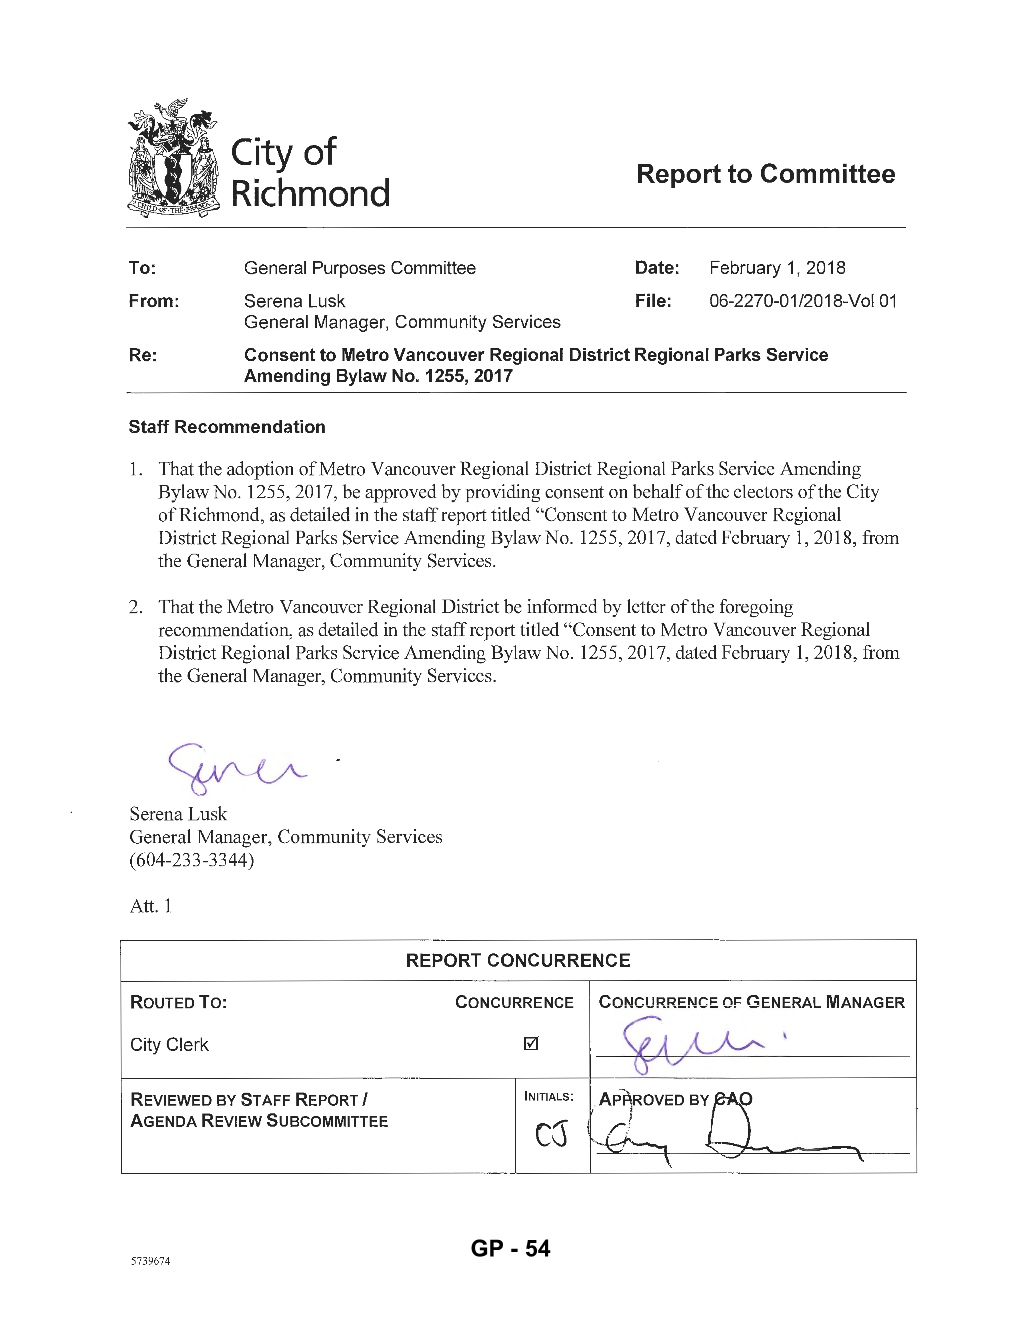 Consent to Metro Vancouver Regional District Regional Parks Service Amending Bylaw No